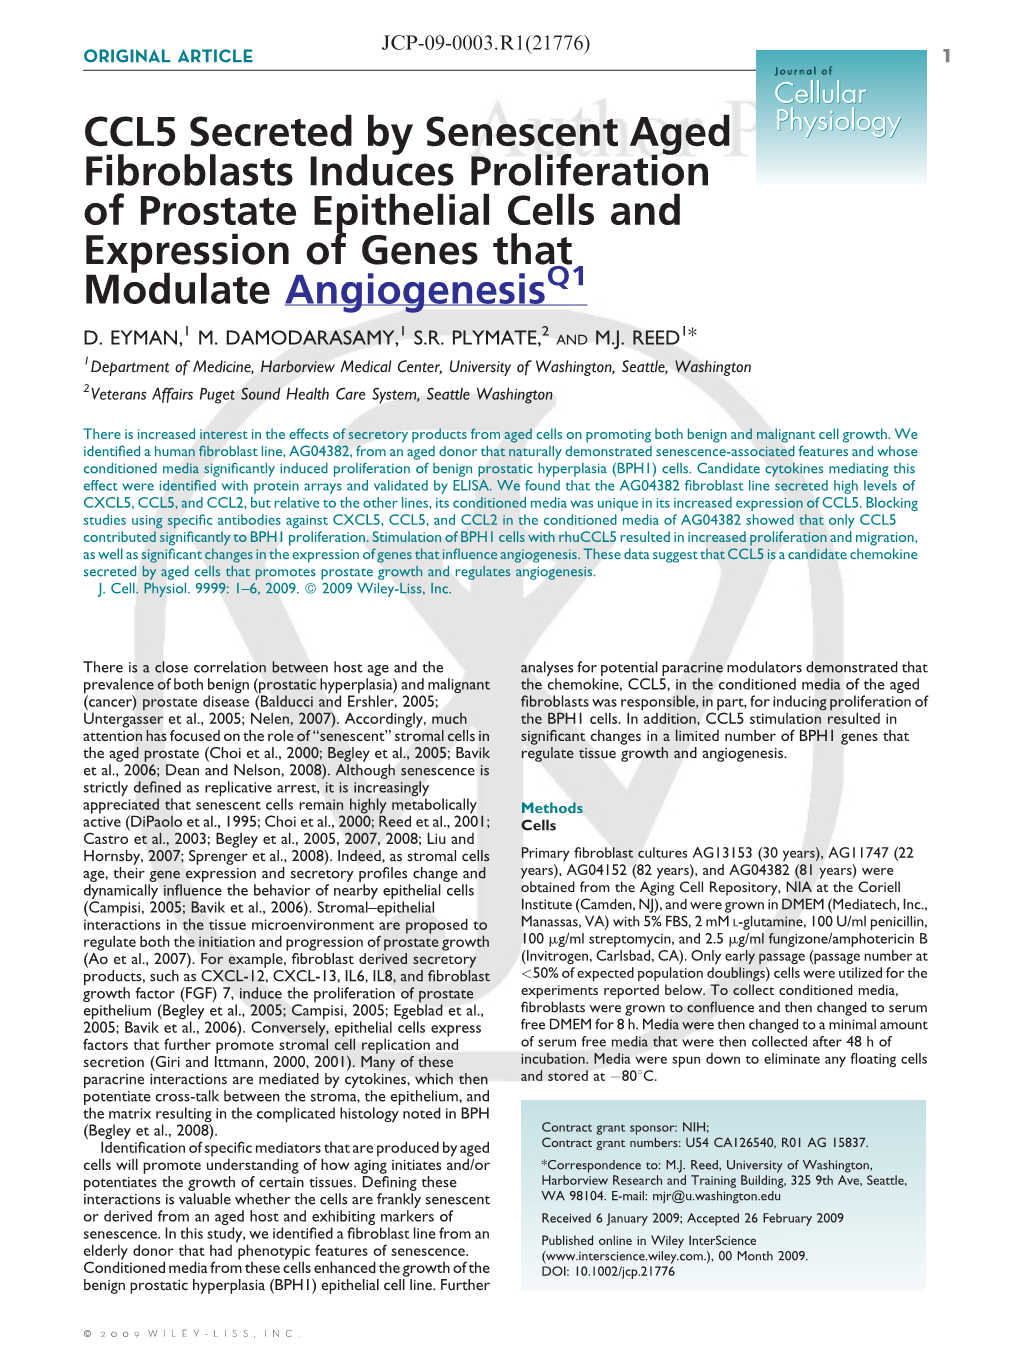 CCL5 Secreted by Senescent Aged Fibroblasts Induces Proliferation of Prostate Epithelial Cells and Expression of Genes That Modu